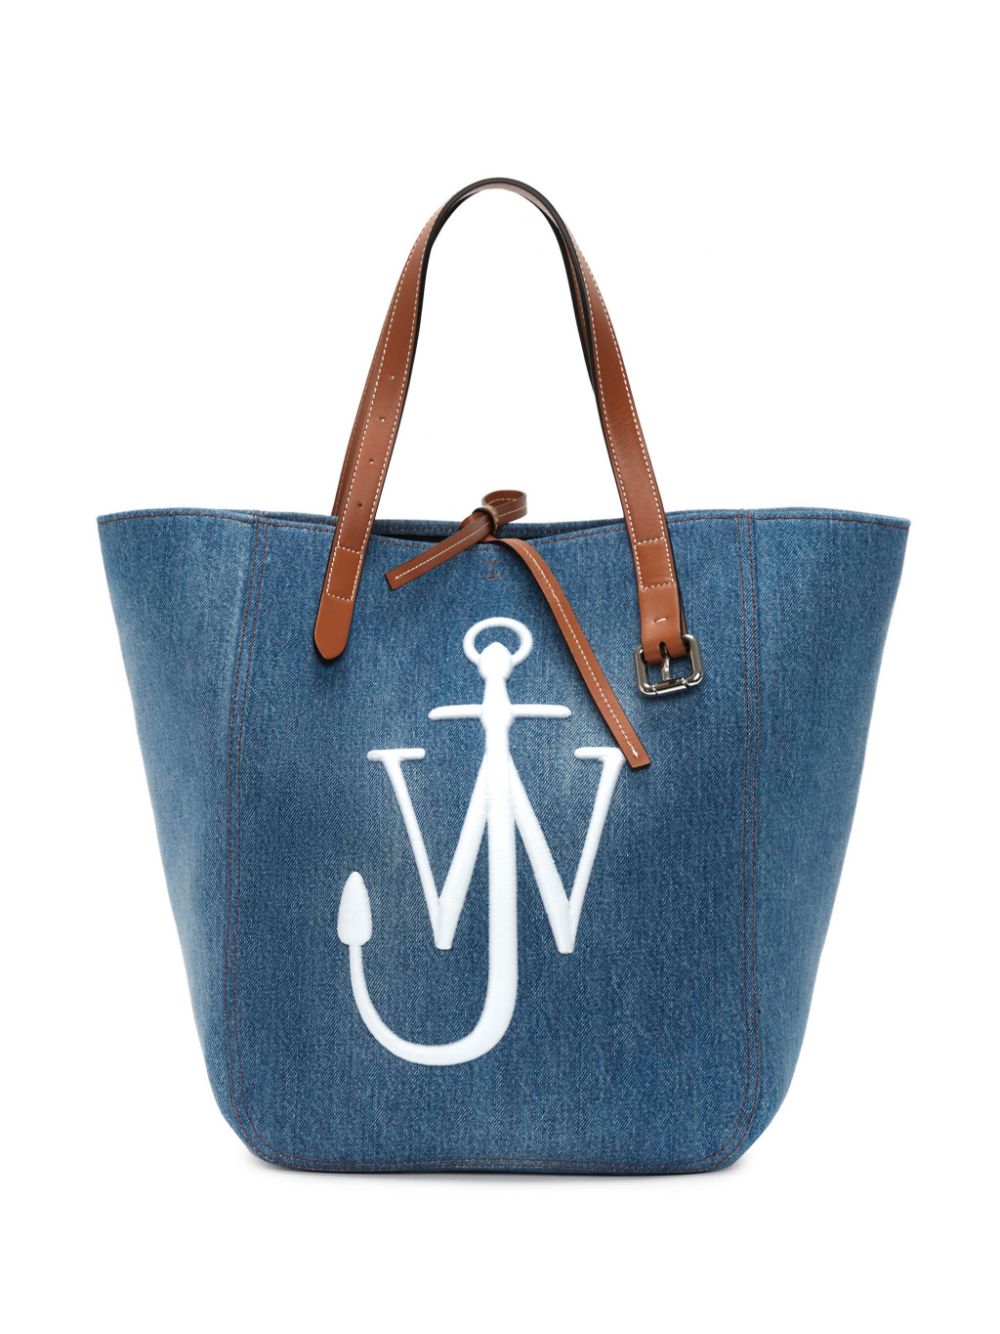 JW ANDERSON Denim Blue Tote Bag for Women with Camel Logo and Blanco Accents